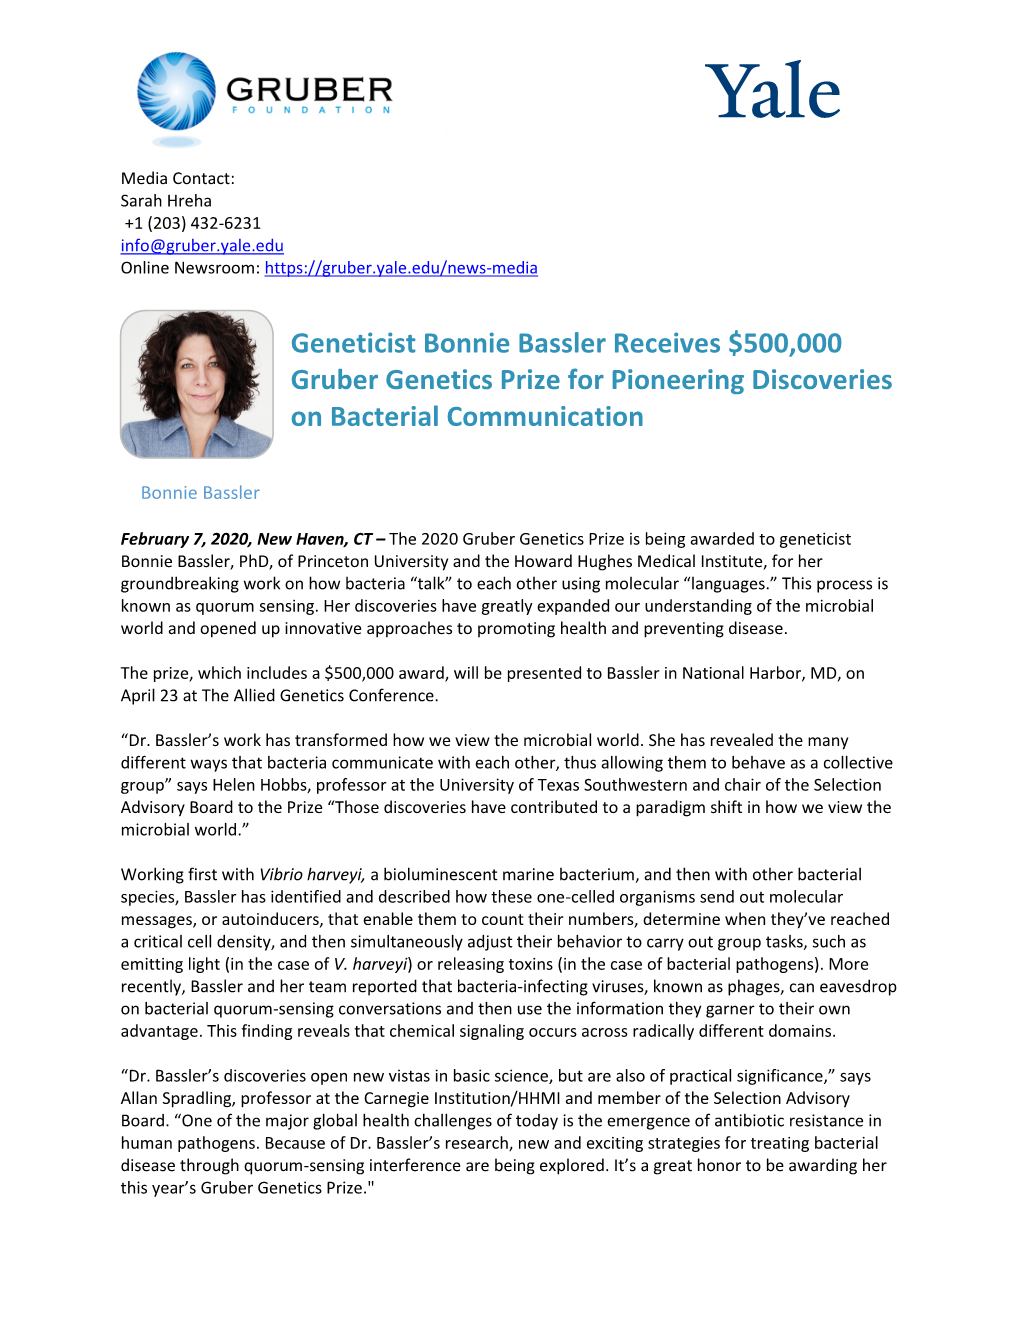 Geneticist Bonnie Bassler Receives $500,000 Gruber Genetics Prize for Pioneering Discoveries on Bacterial Communication